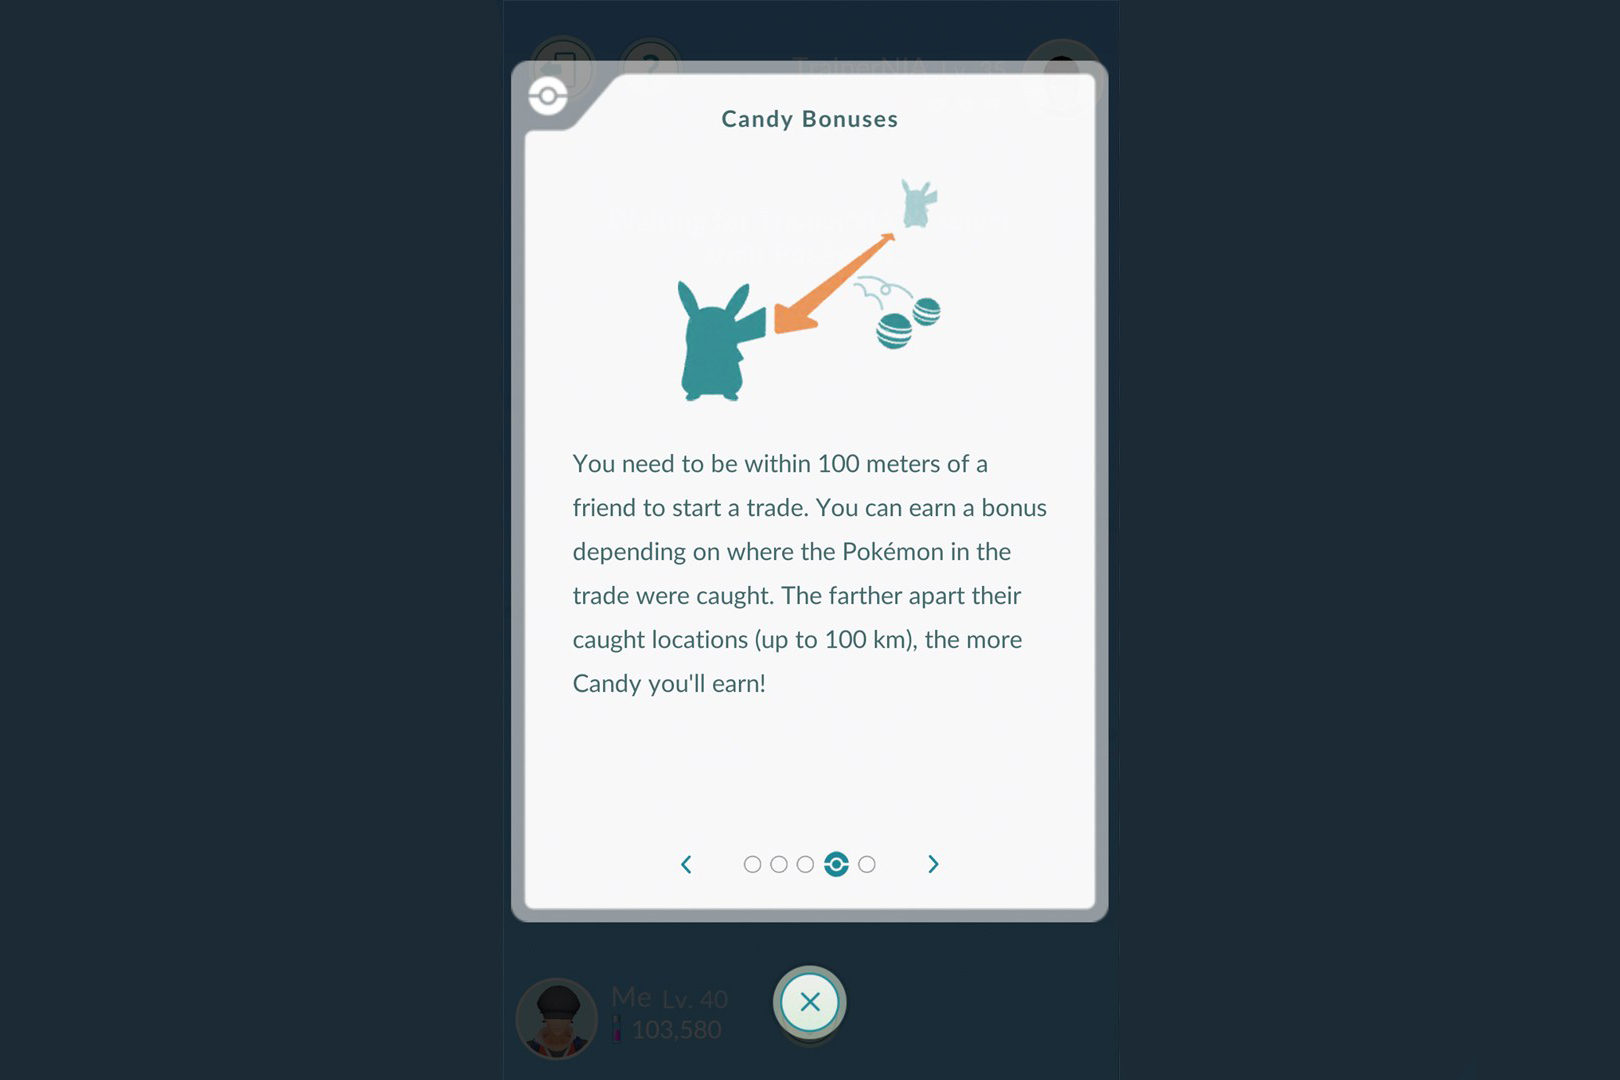 How to trade with other trainers in Pokémon Go